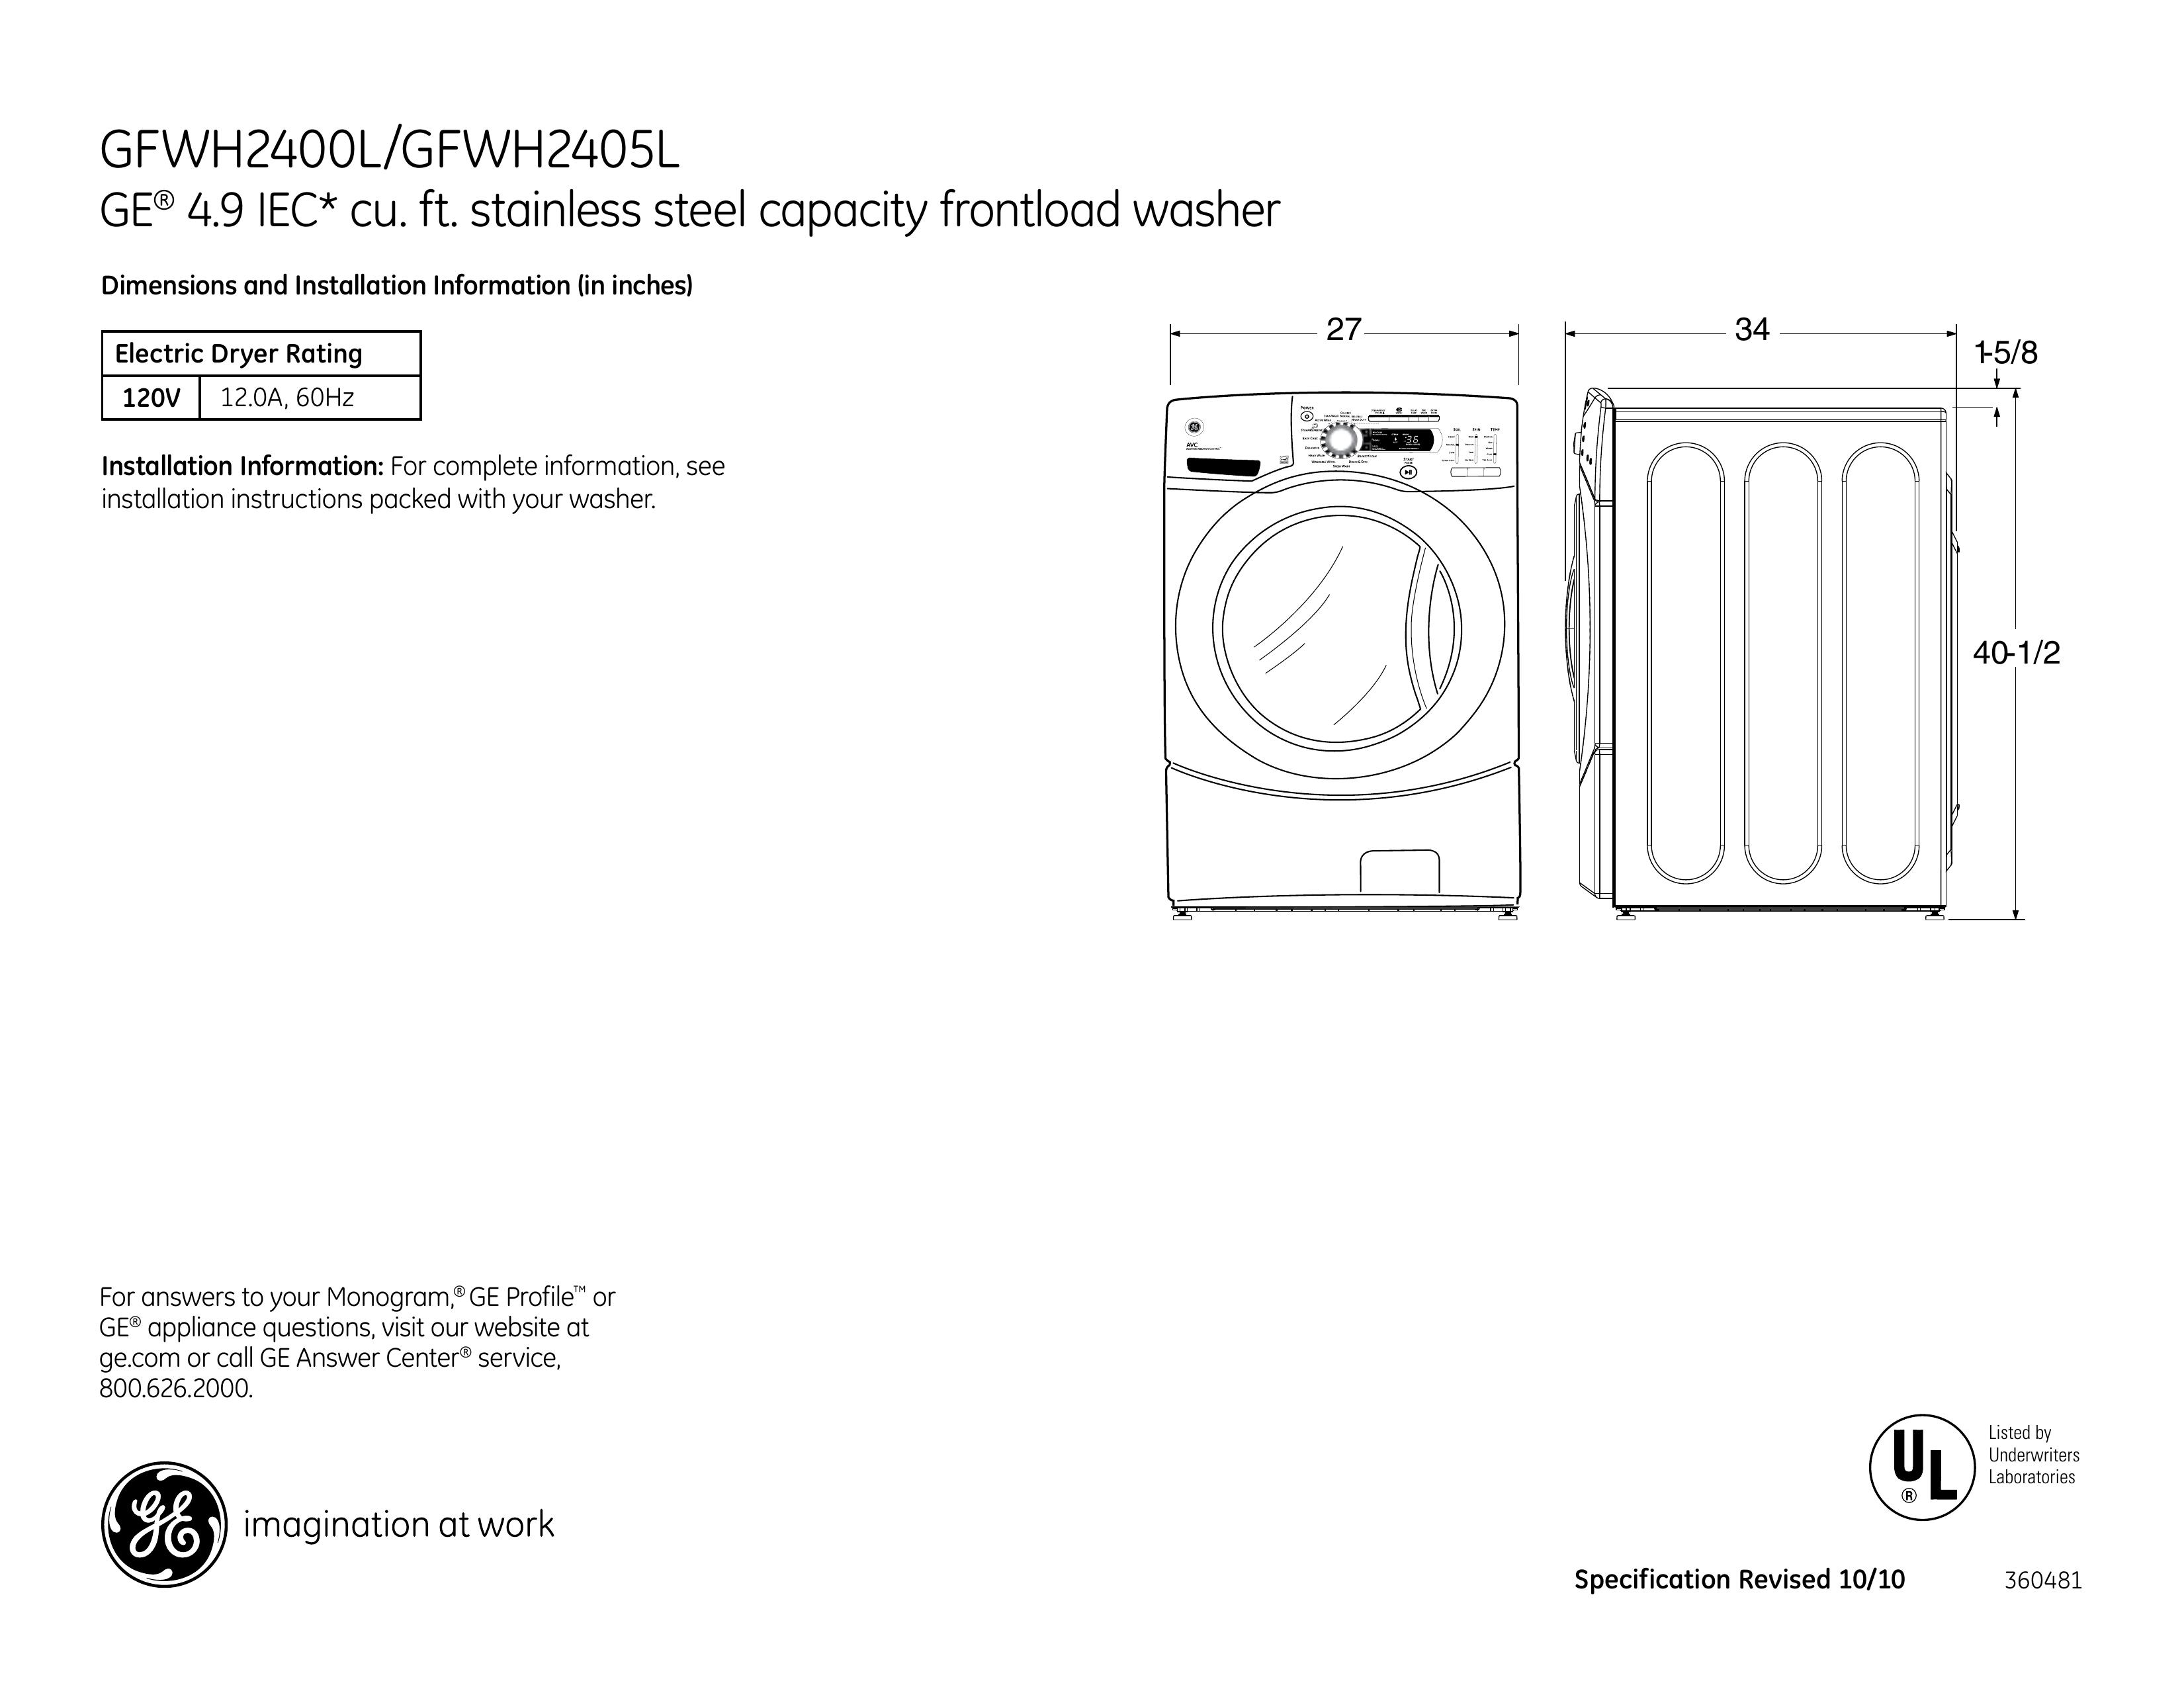 GE GFWH2405L Washer User Manual